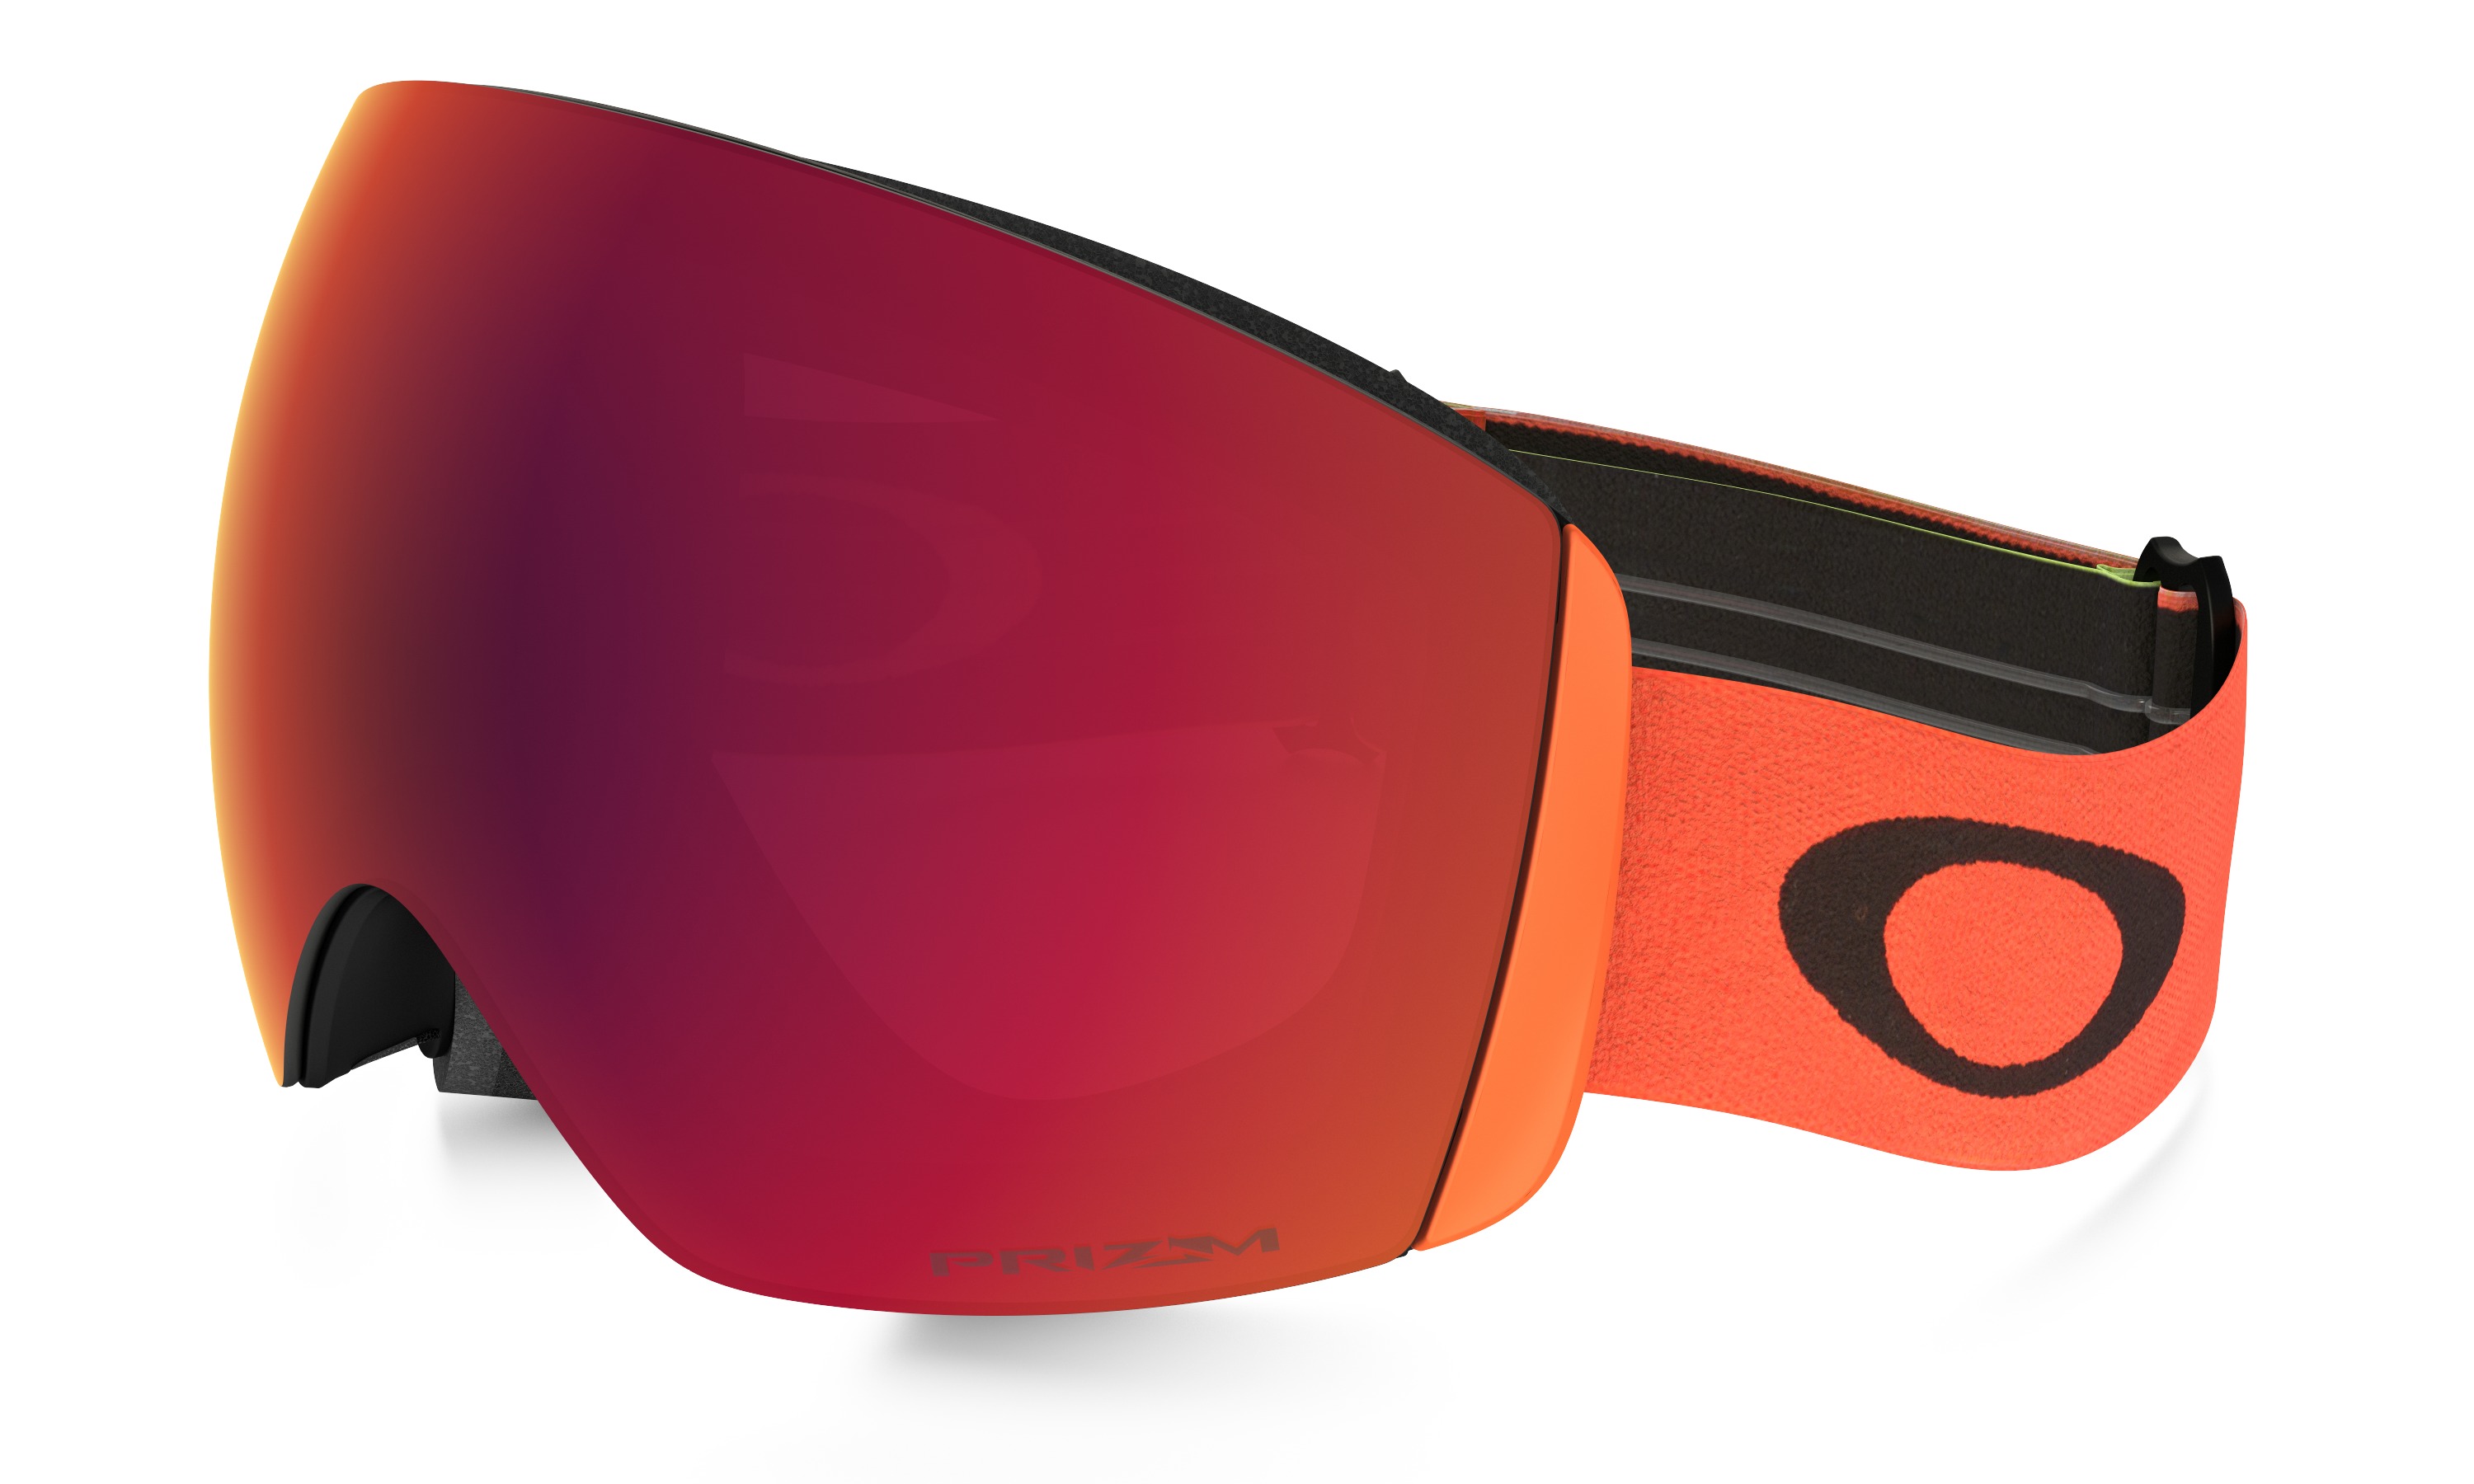 Those orange & yellow Oakley goggles from the Olympics so hot 